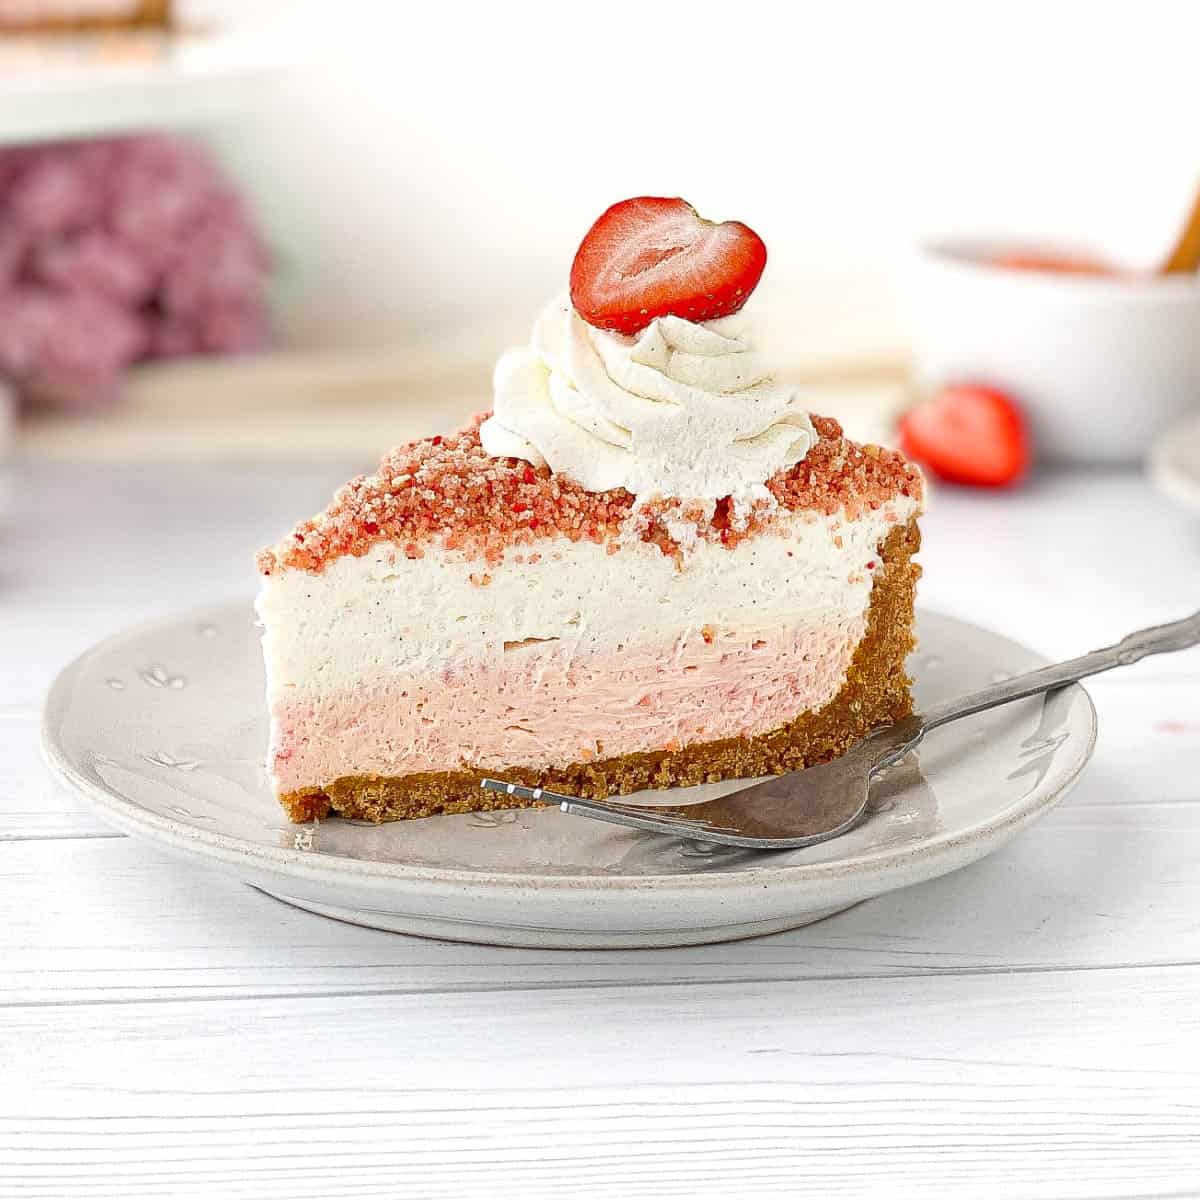 Slice of Strawberry Crunch Cheesecake on white plate.